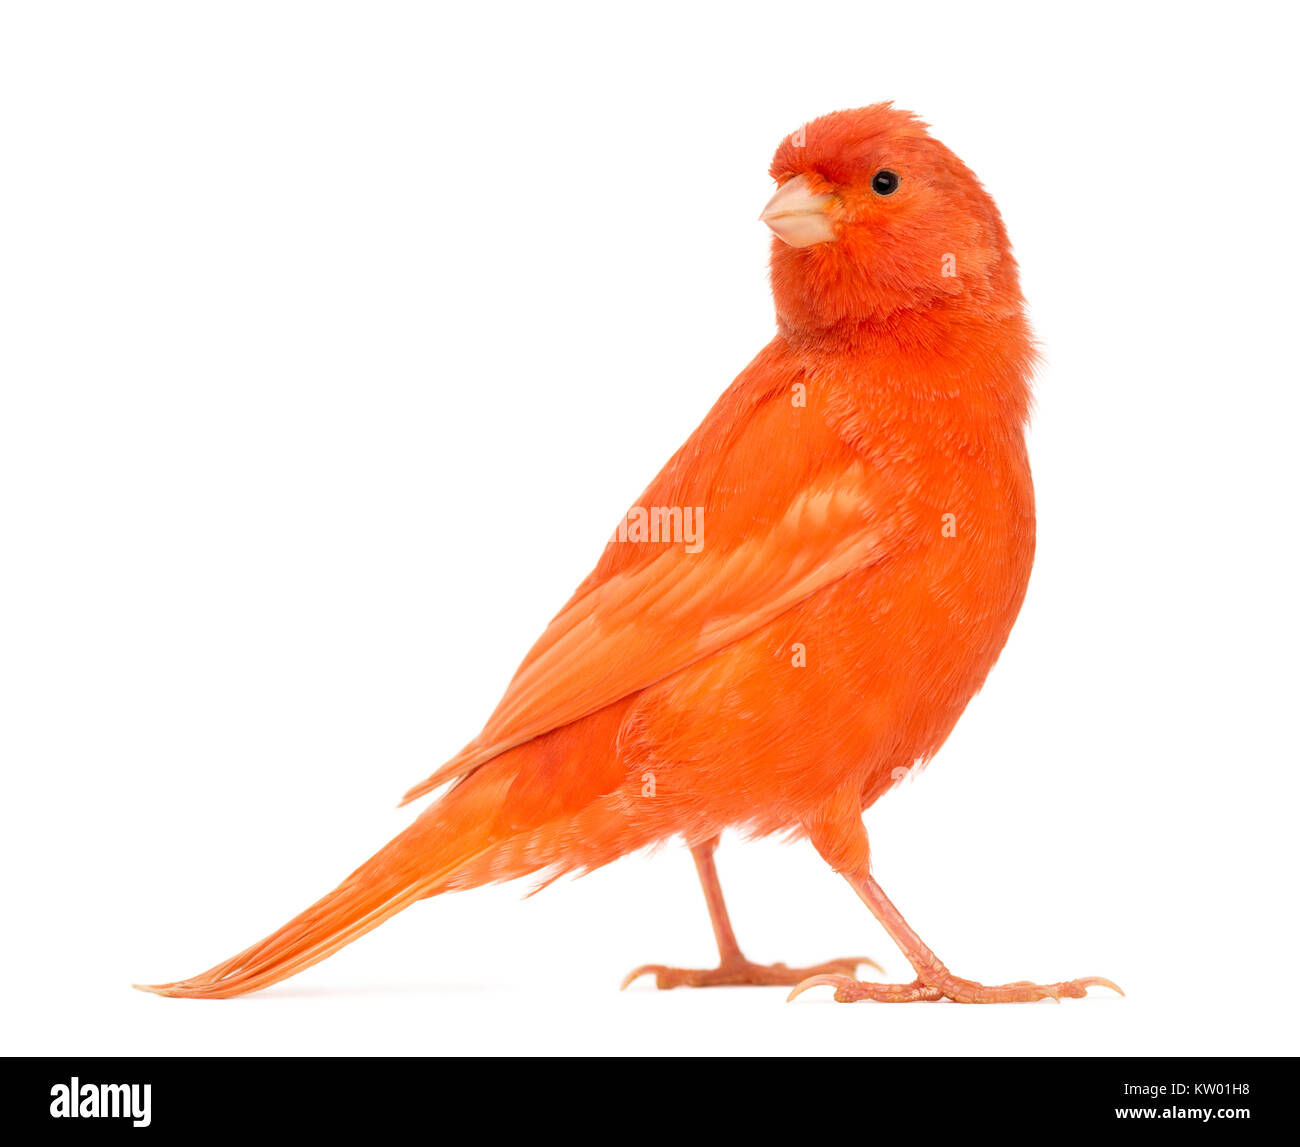 Red canary, Serinus canaria, against white background Stock Photo